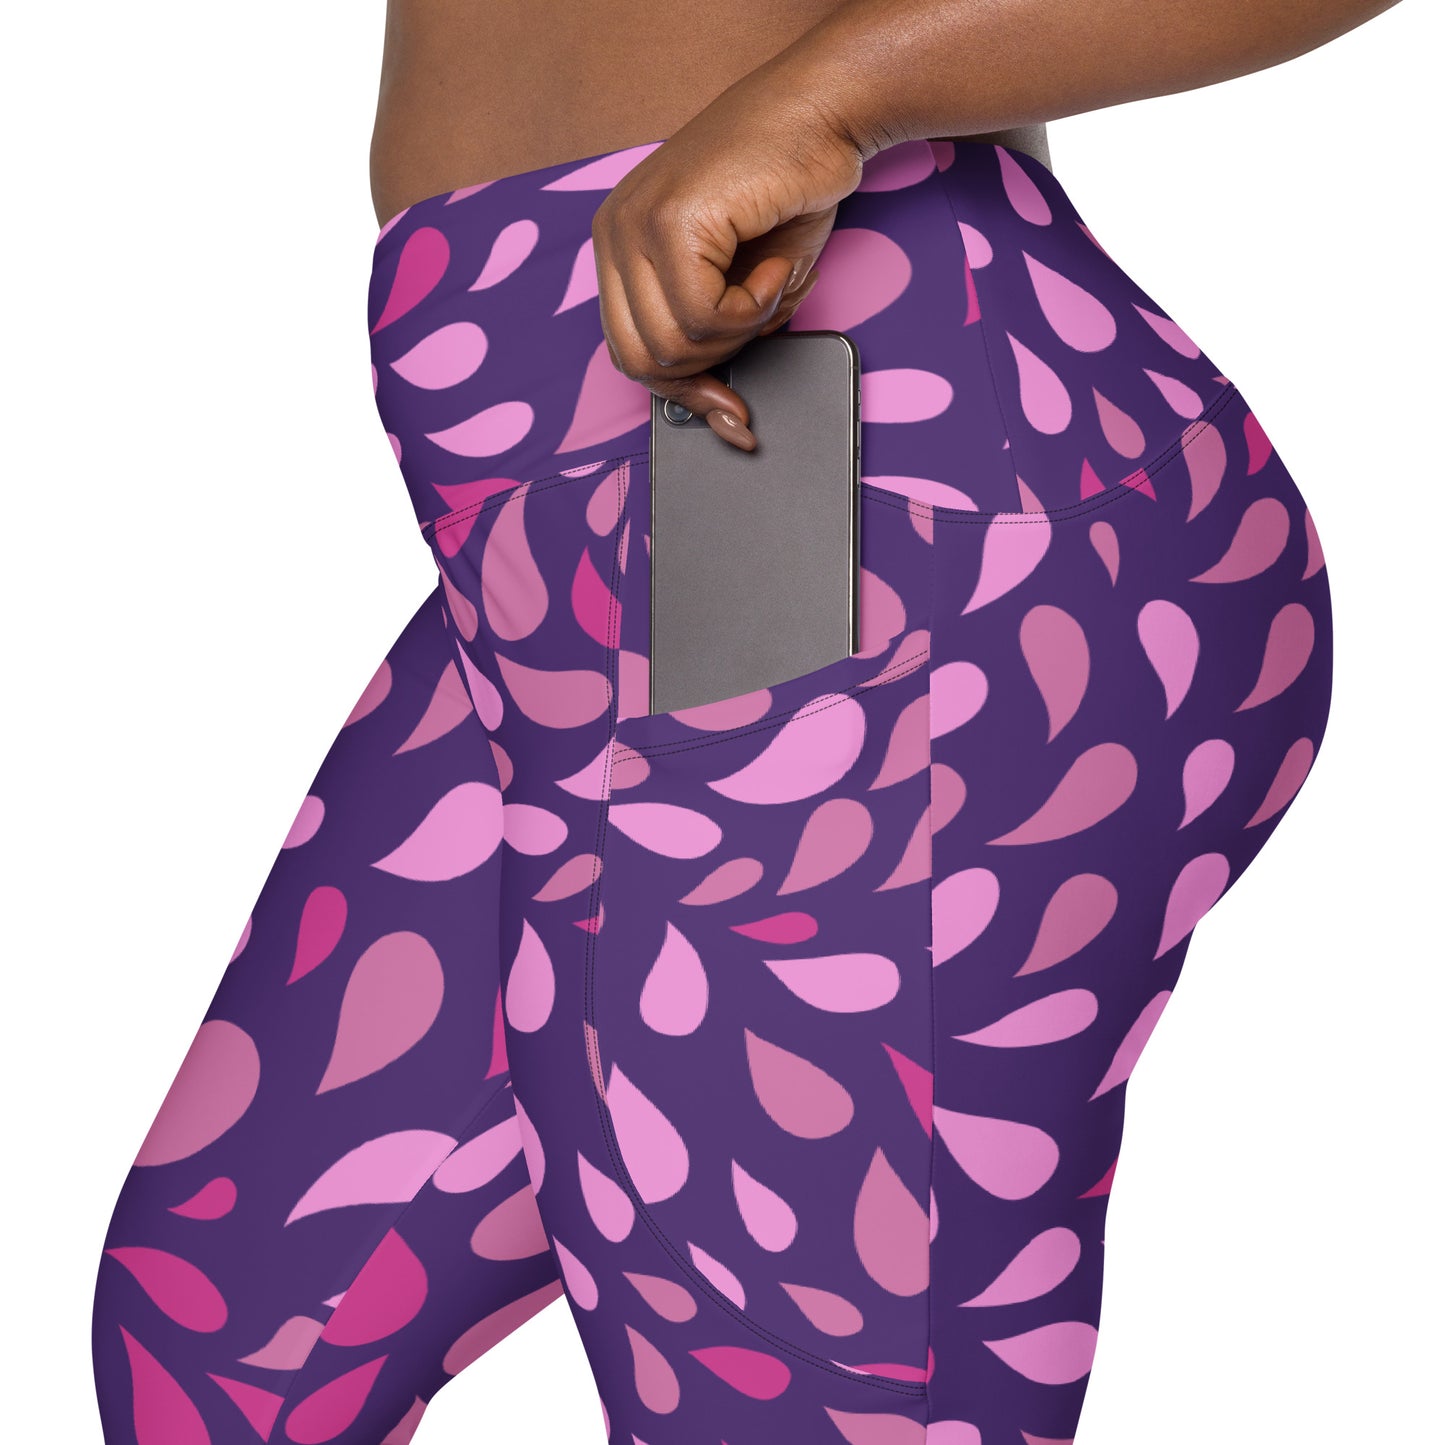 Purple Leaves - Leggings with pockets, 2XS - 6XL Leggings With Pockets 2XS - 6XL (US)